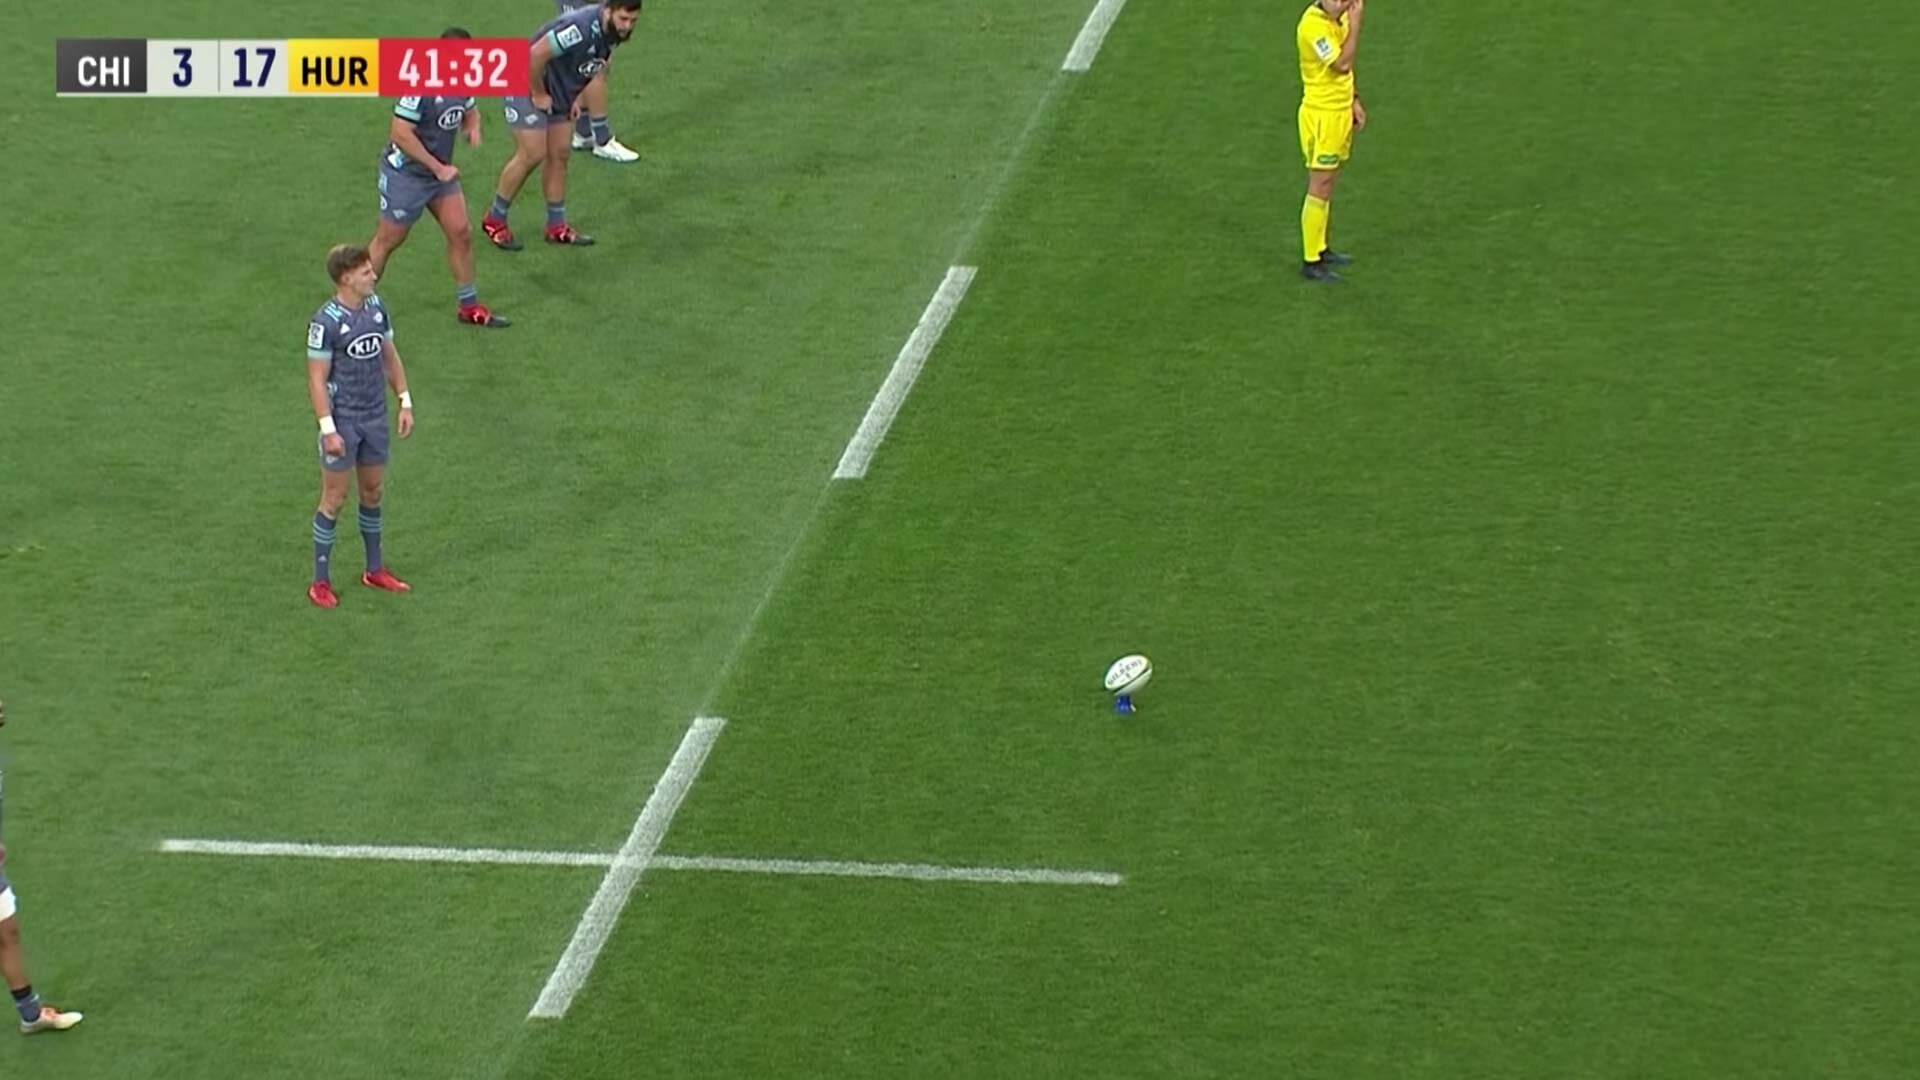 Everyone is talking about what Jordie Barrett did in Super Rugby today